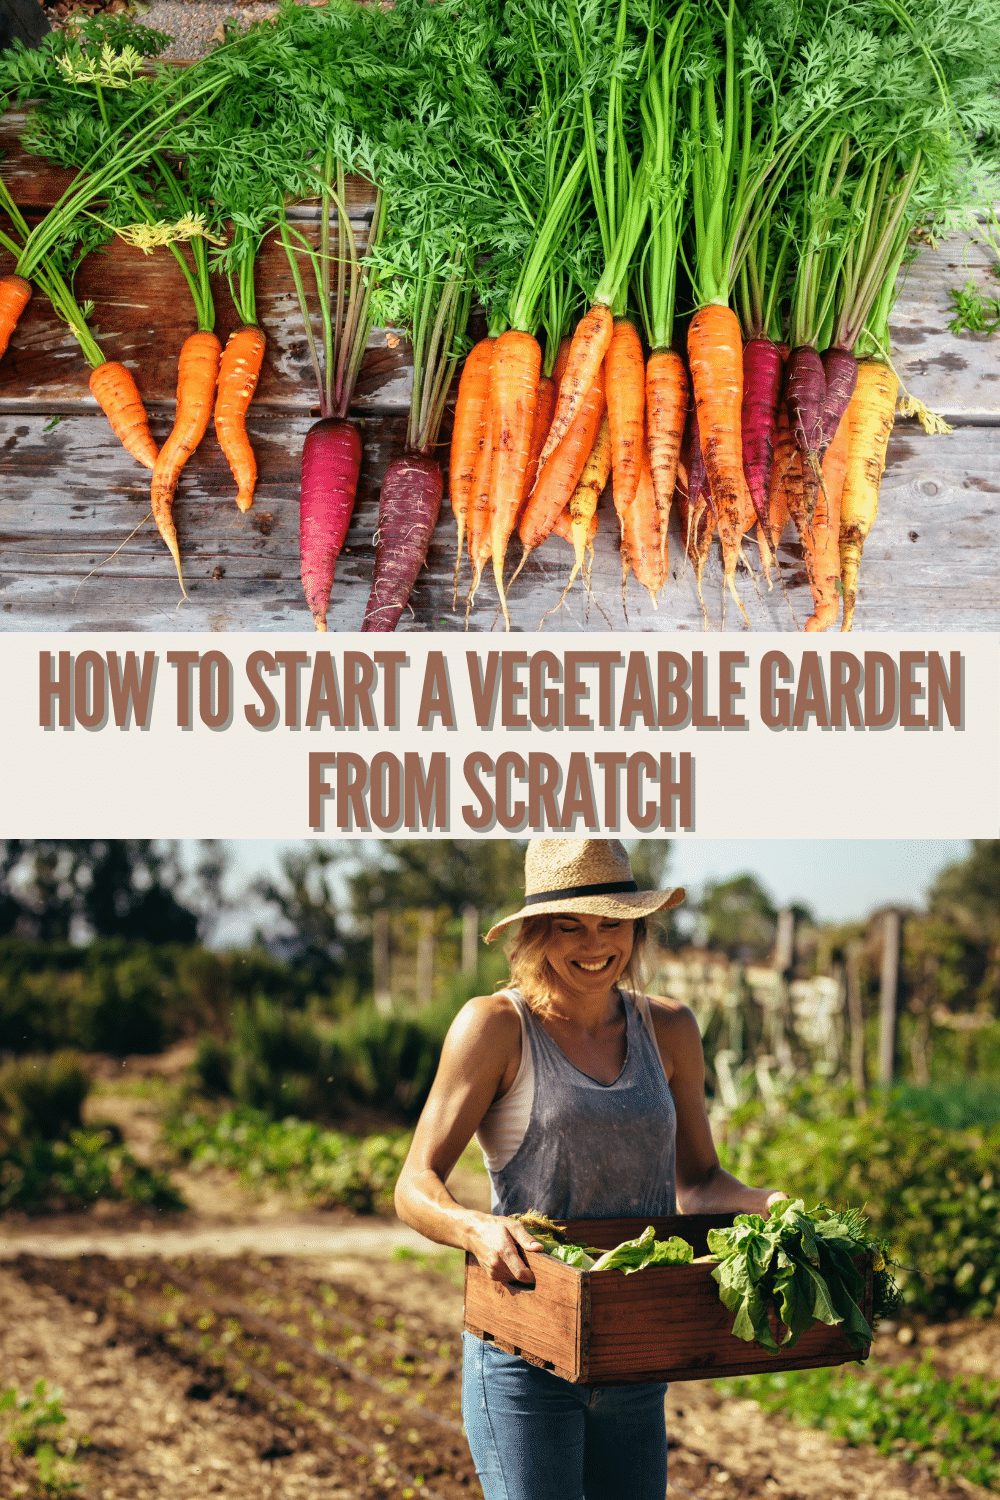 If you're looking for how to start a vegetable garden, you're in luck! These simple tips will have you growing your own food in no time at all! #gardening #tips #vegetable #greenthumb via @wondermomwannab